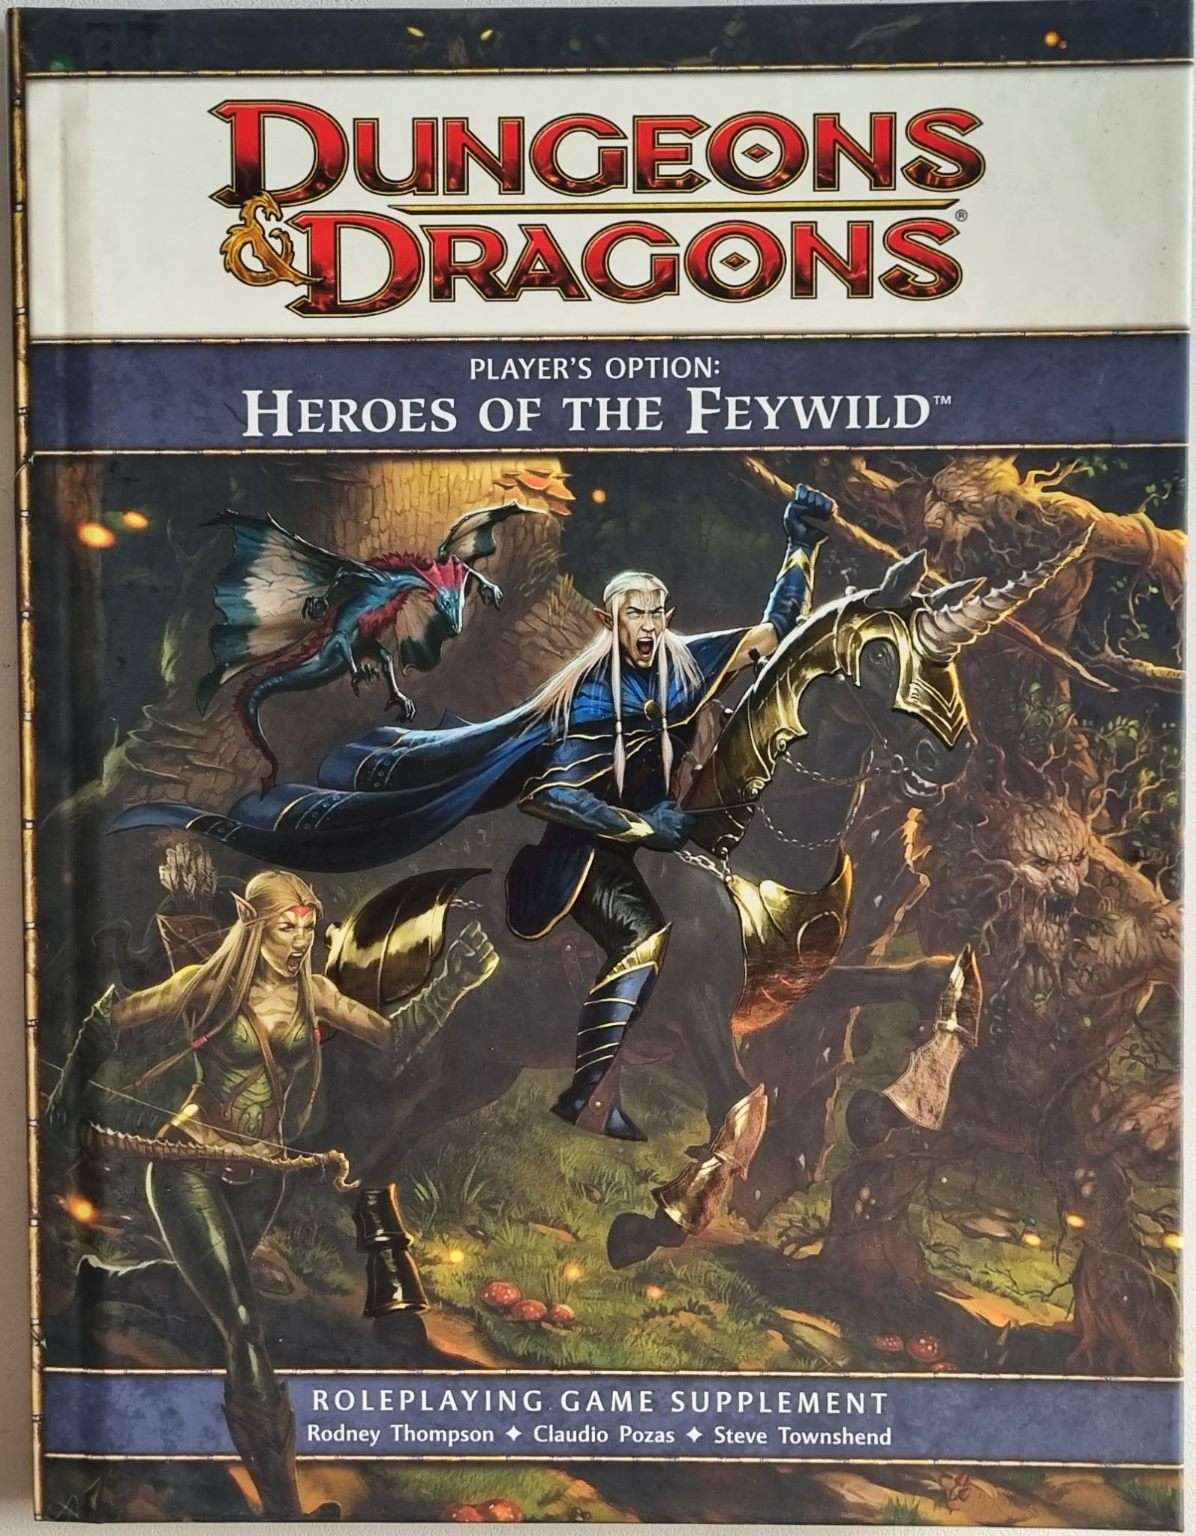 Dungeons and Dragons: Player's Options: Heroes of the Feywild 4e